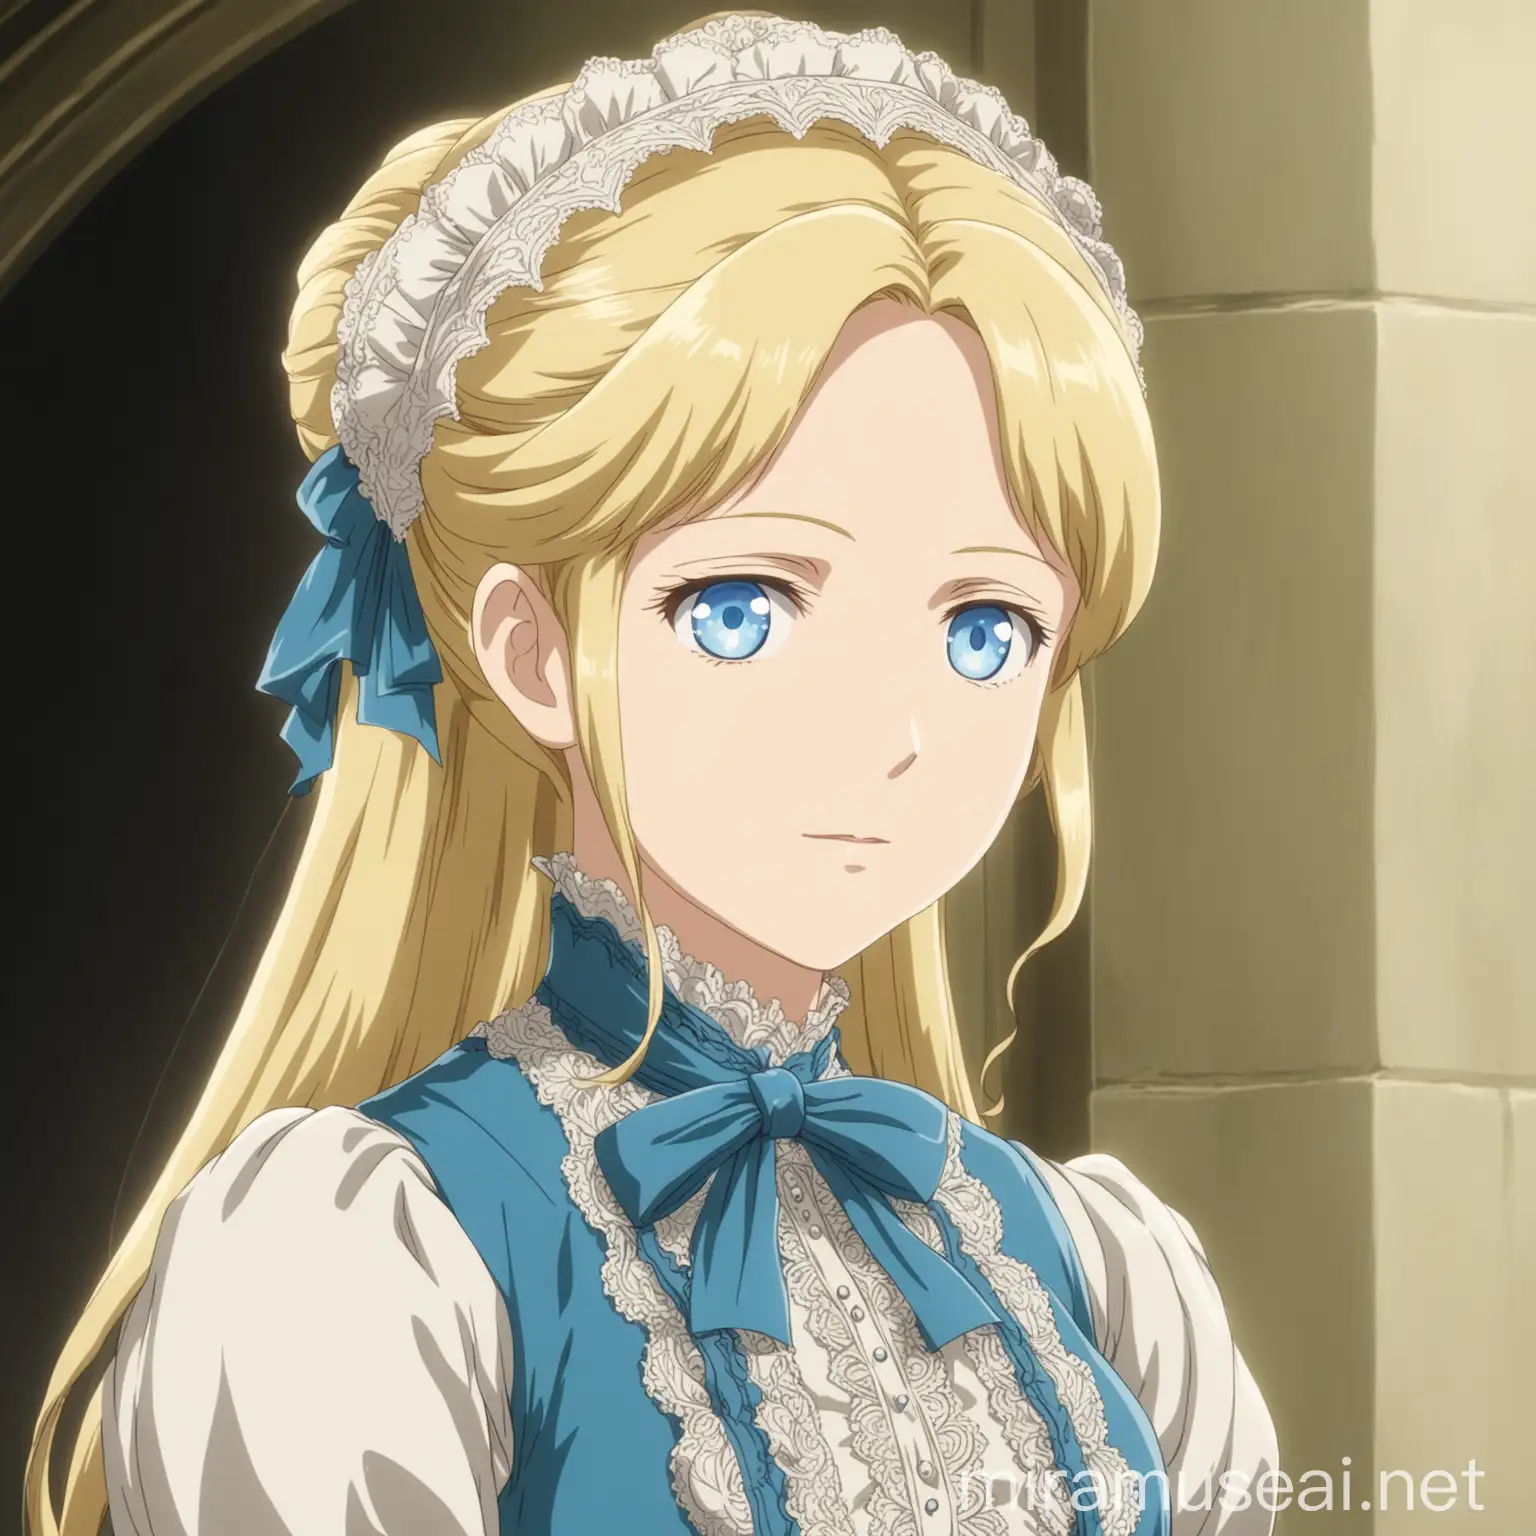 a blonde woman with blue eyes, she wears victorian clothes, She has a calm and optimistic look, in anime